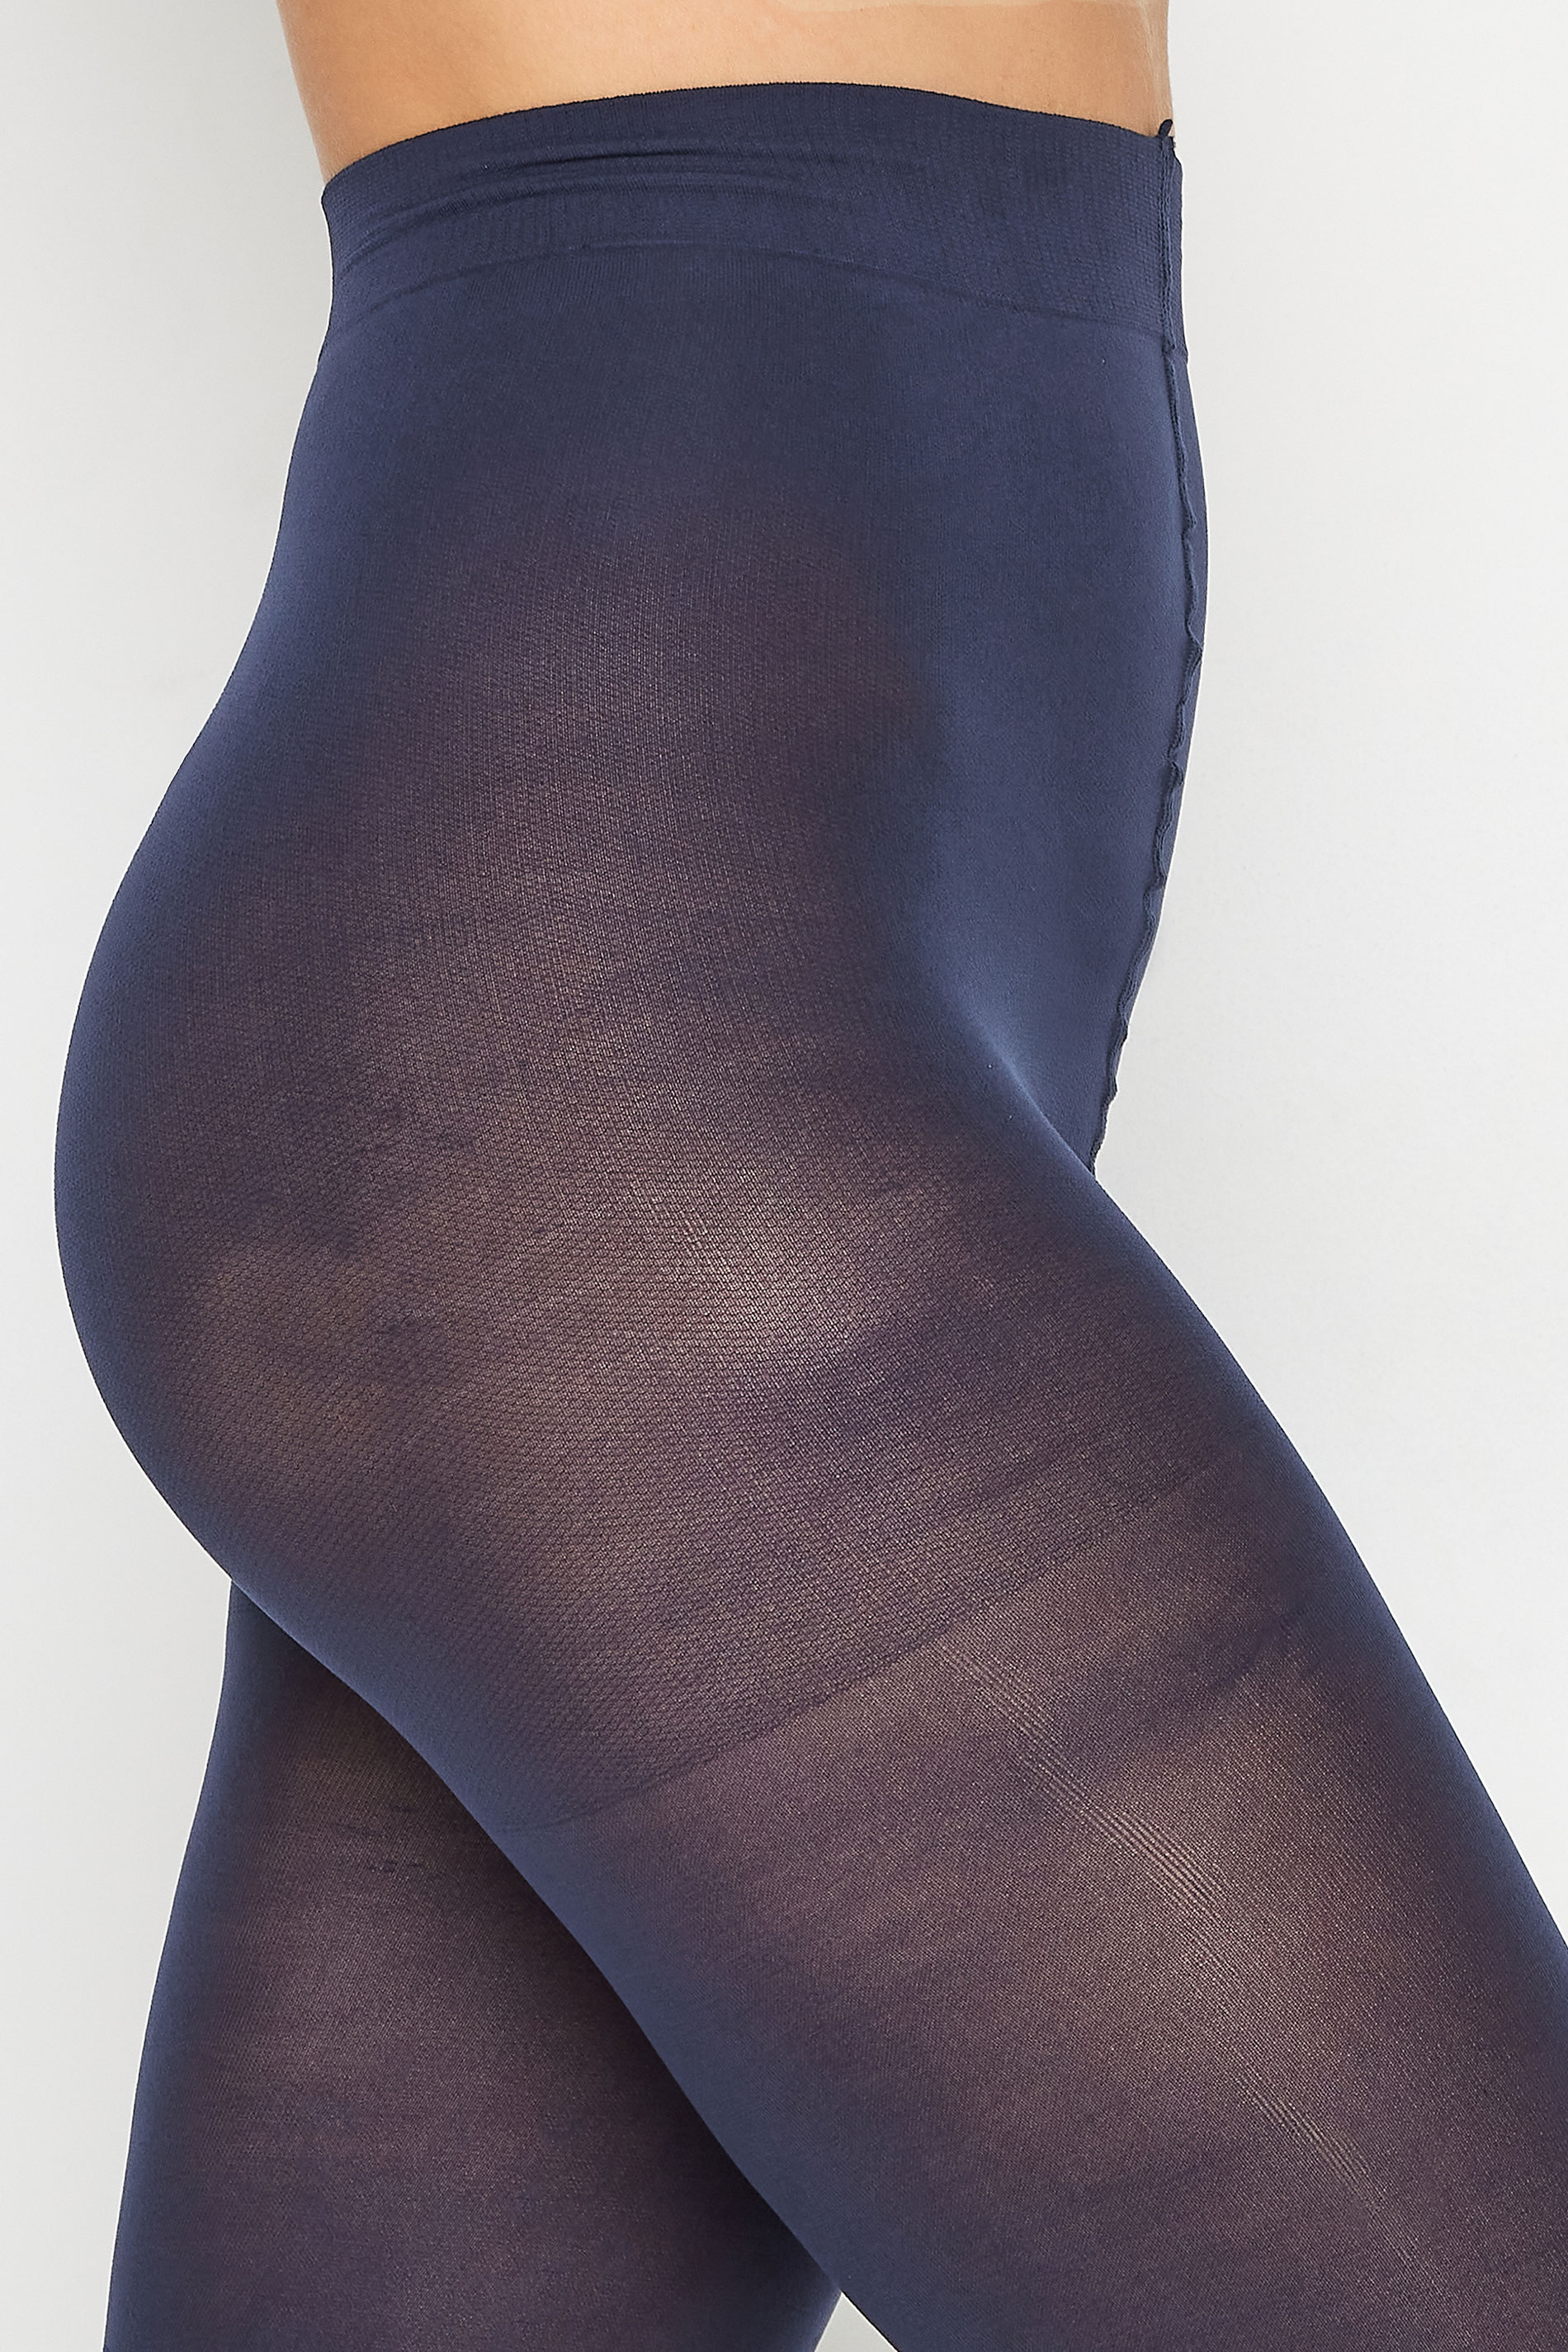 Women's Plus Size 50D Opaque Tights - A New Day™ Navy 1X/2X